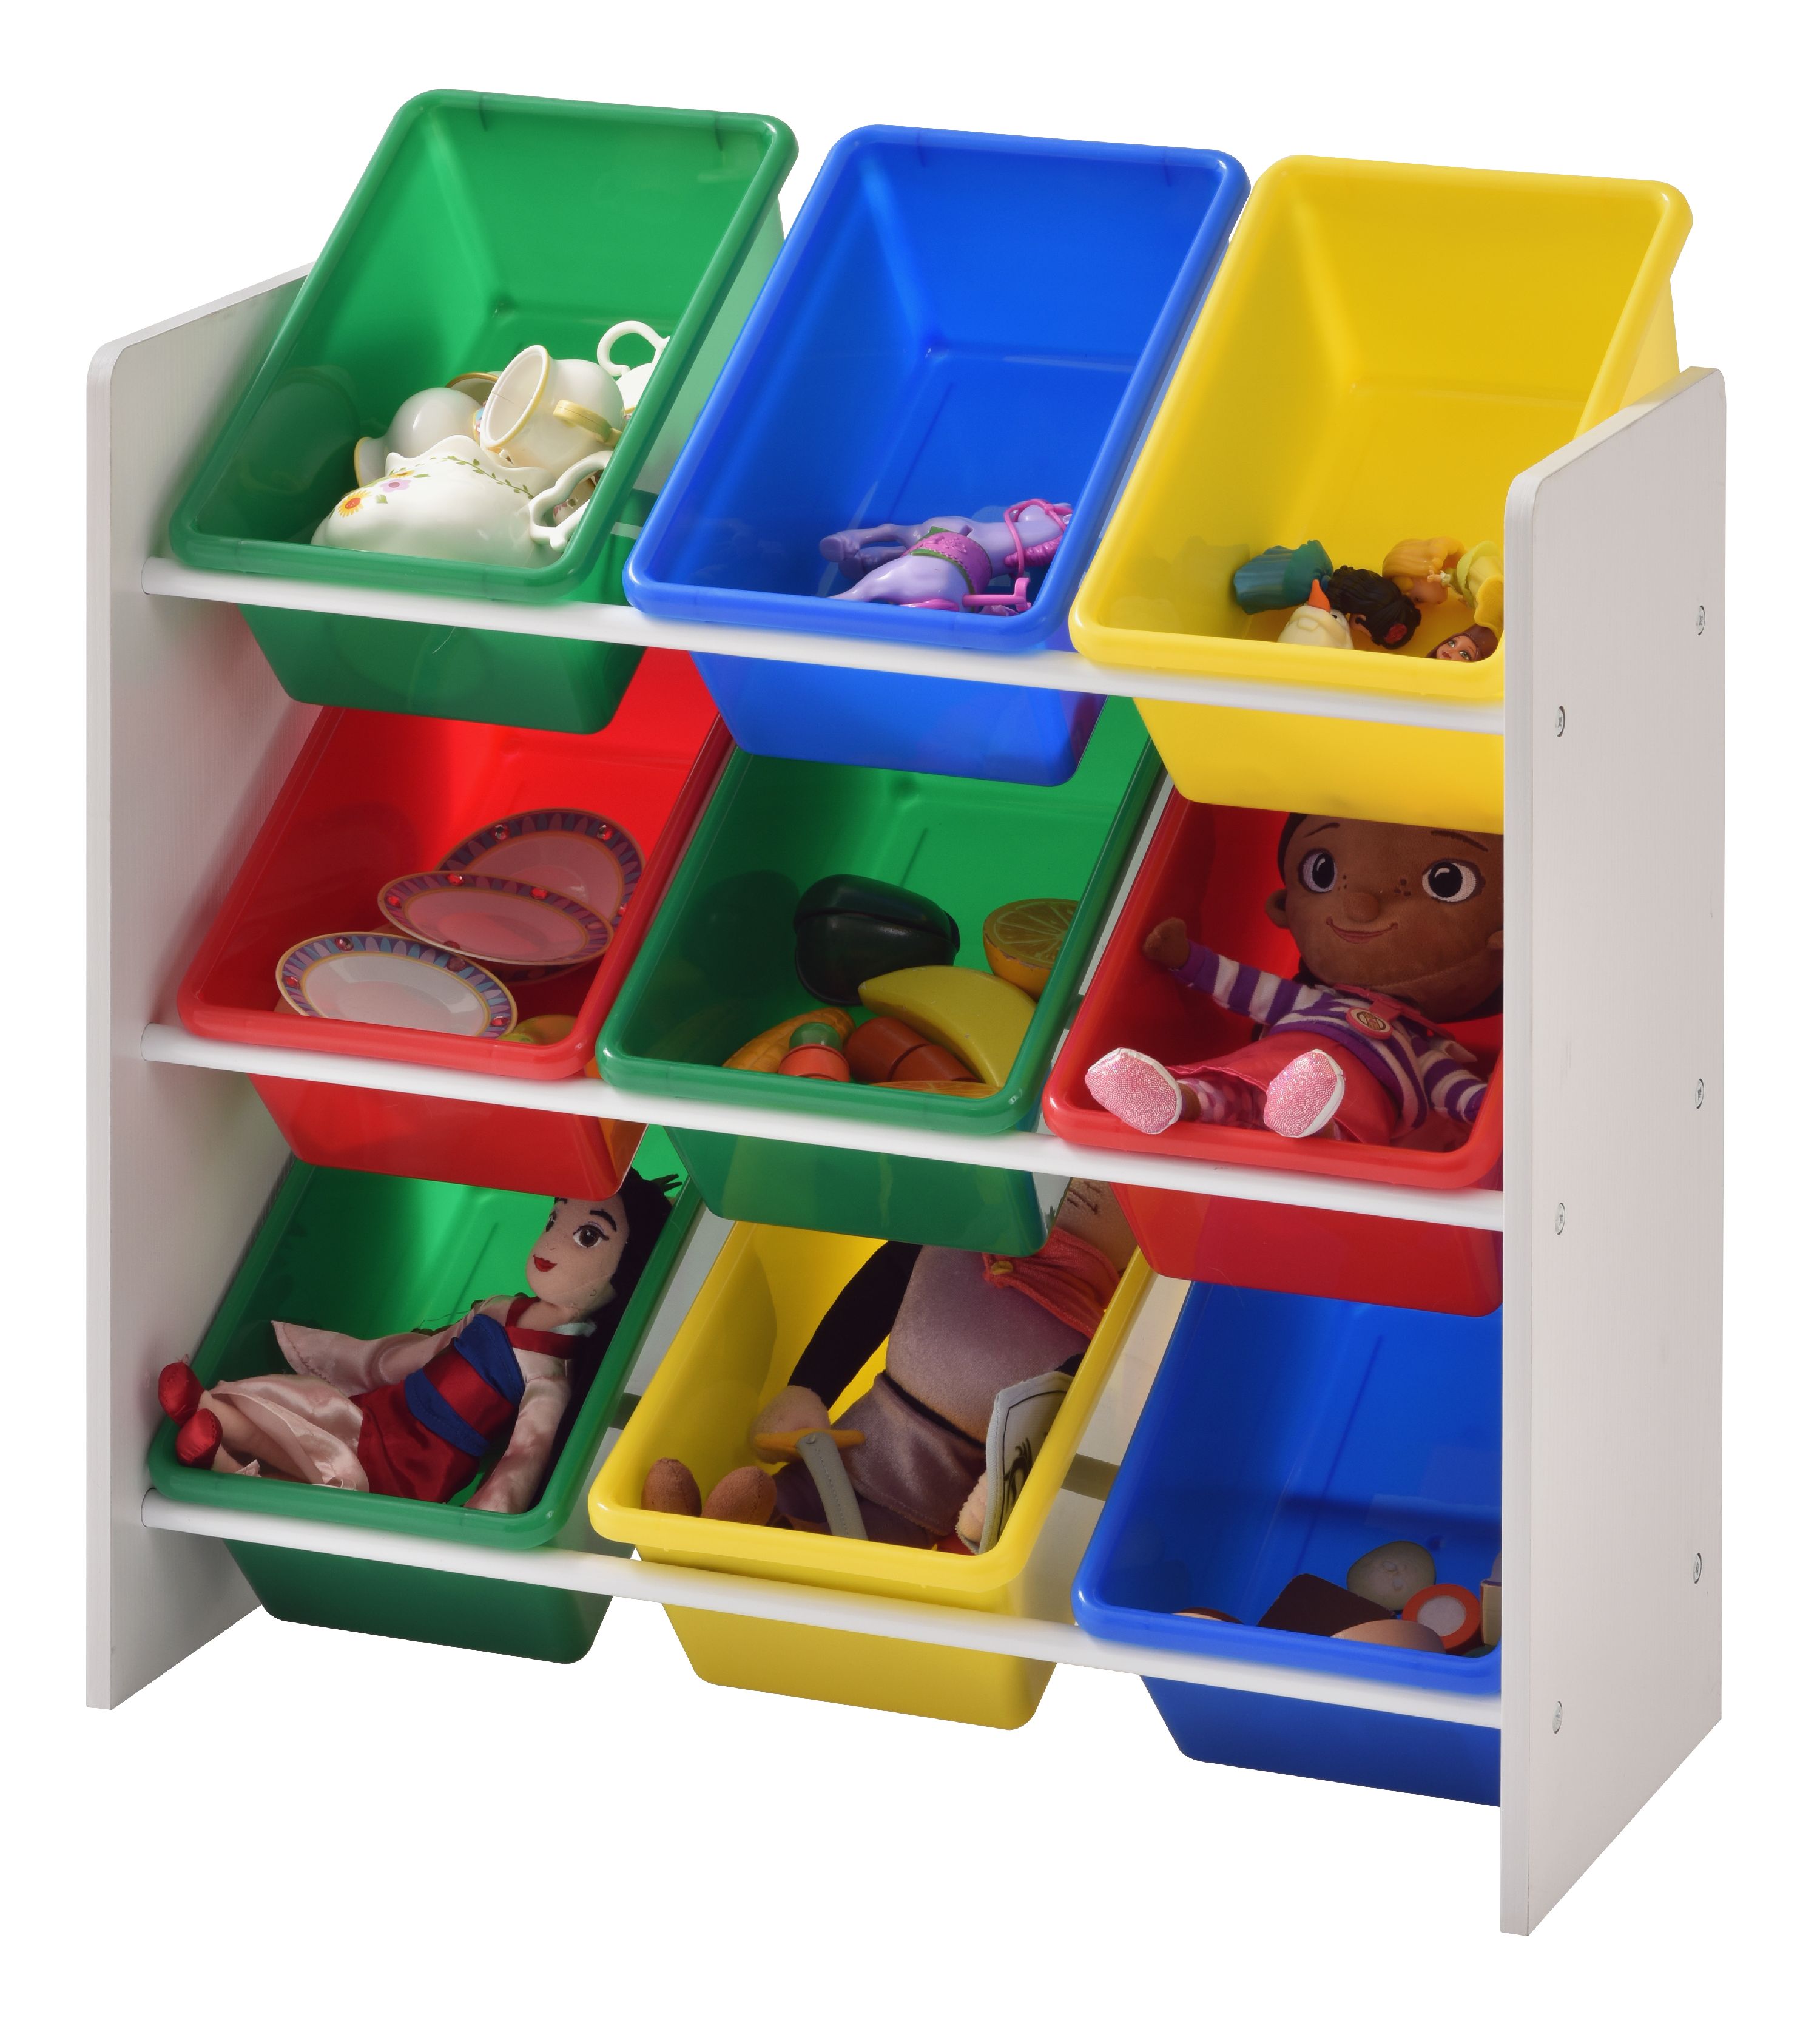 Muscle Rack Kids Storage Organizer with 9 Multi color Bins - image 2 of 3